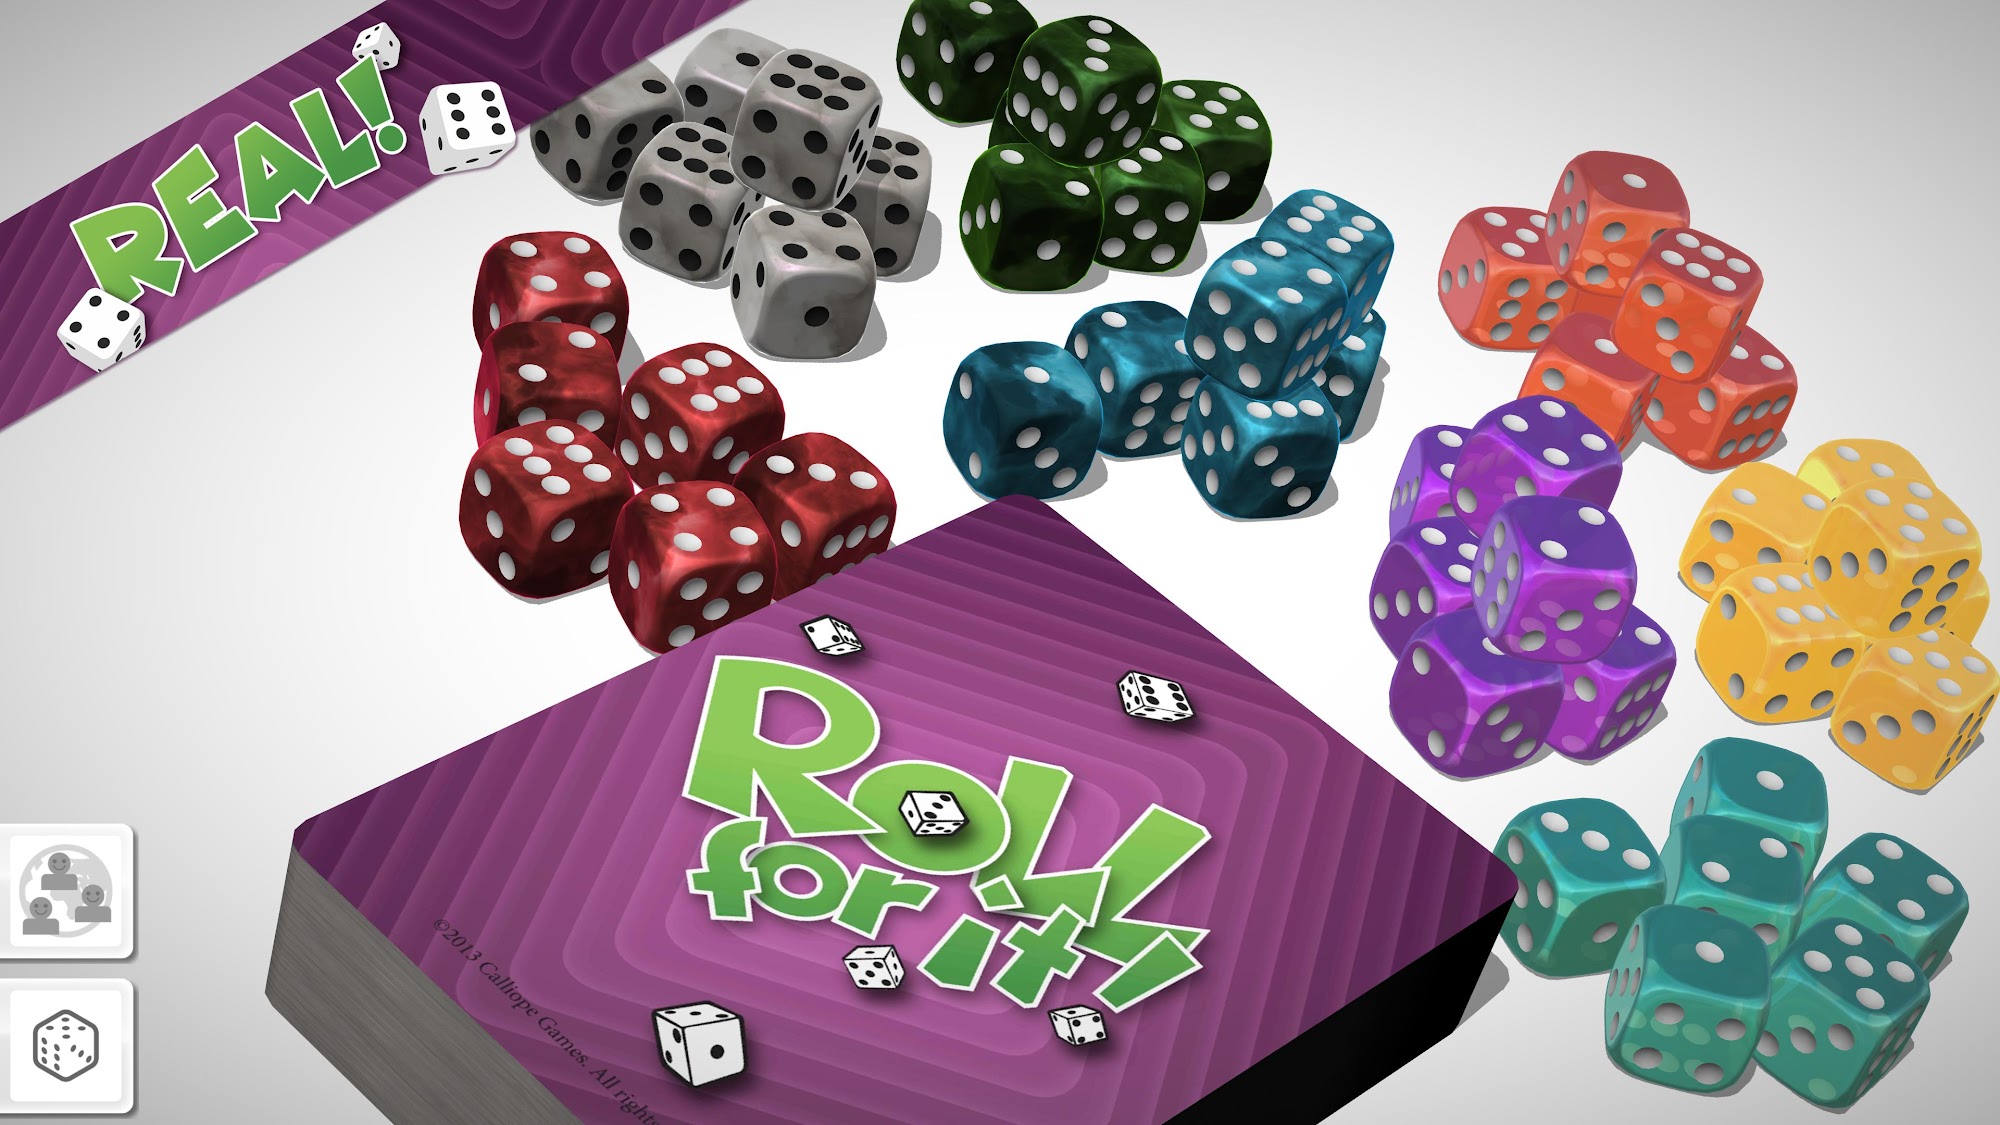 Roll download. Roll for it. Roll the dice game. Roll for it! Board game. Wallpaper 4к dice Cube.